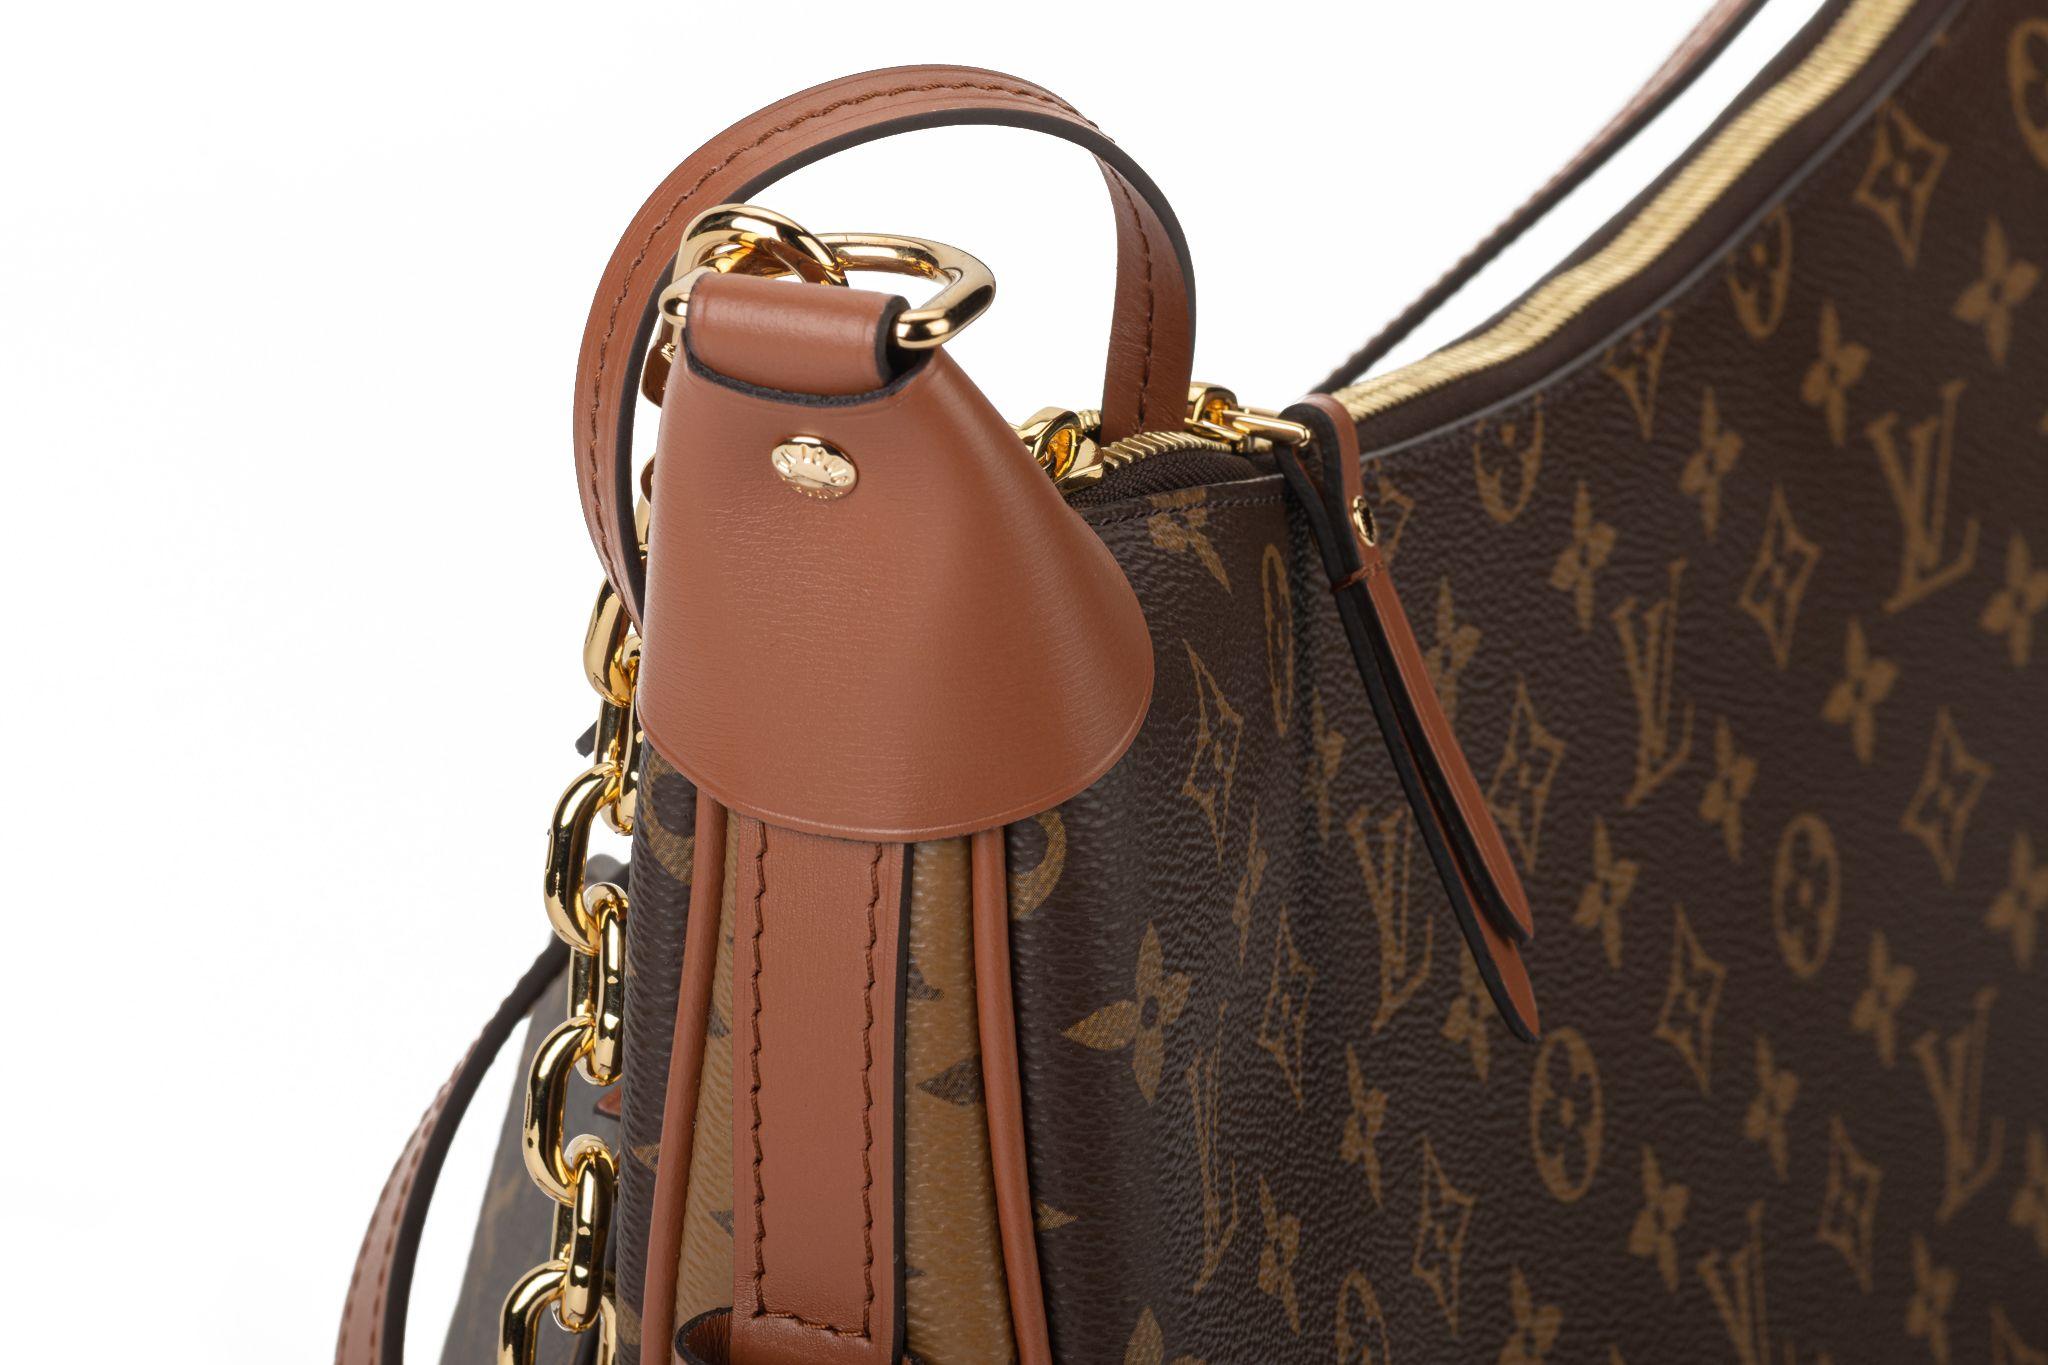 Louis Vuitton BNIB 2 Tone Monogram Hobo Bag In New Condition For Sale In West Hollywood, CA